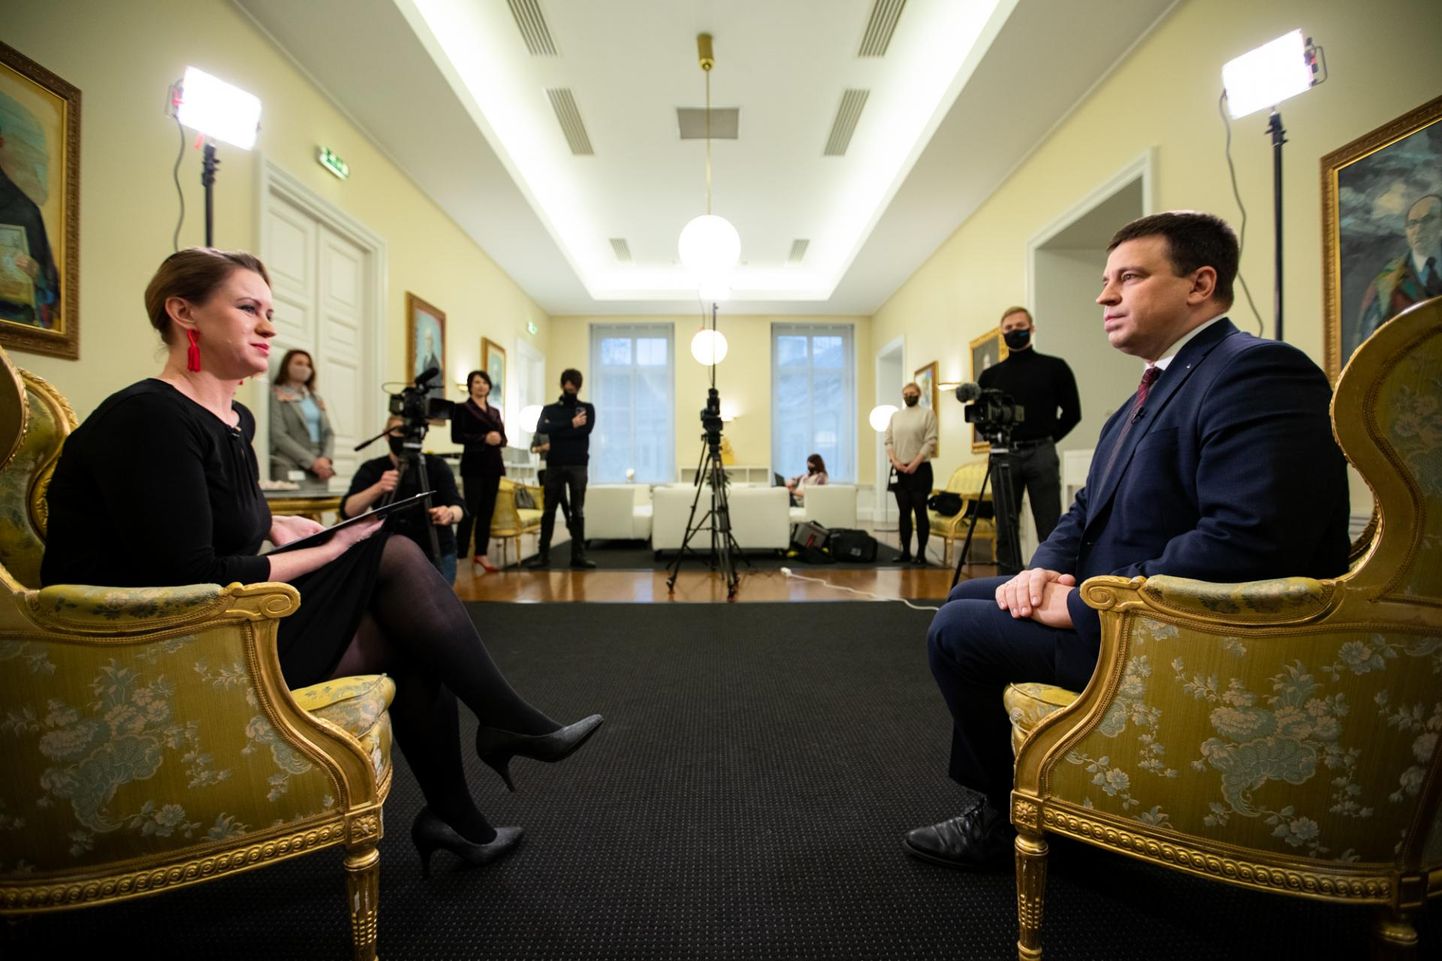 Postimees' end of the year interview with PM Jüri Ratas on December 18.